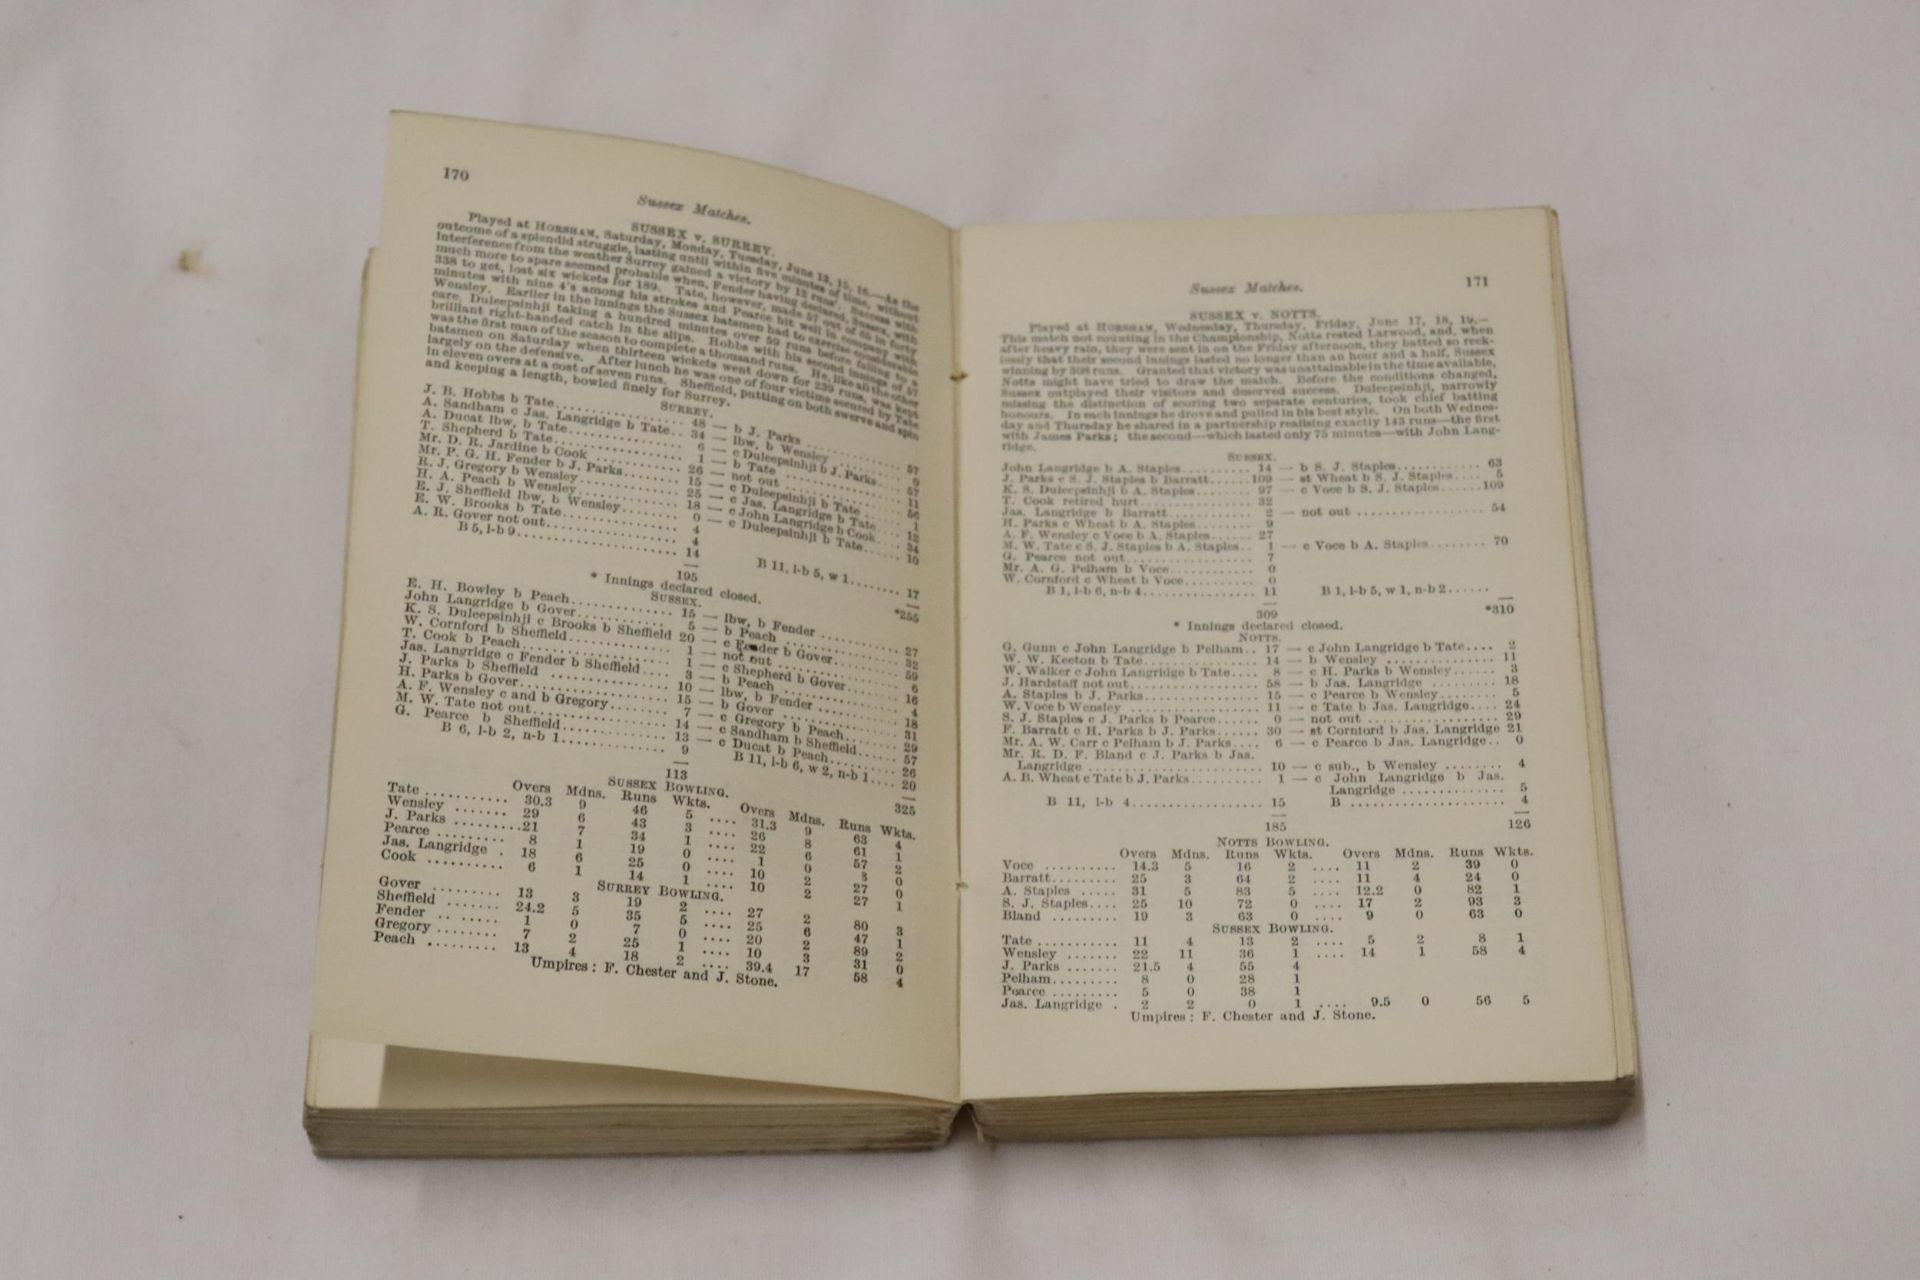 A 1932 COPY OF WISDEN'S CRICKETER'S ALMANACK. THIS COPY IS IN USED CONDITION, MISSING PART OF THE - Image 4 of 4